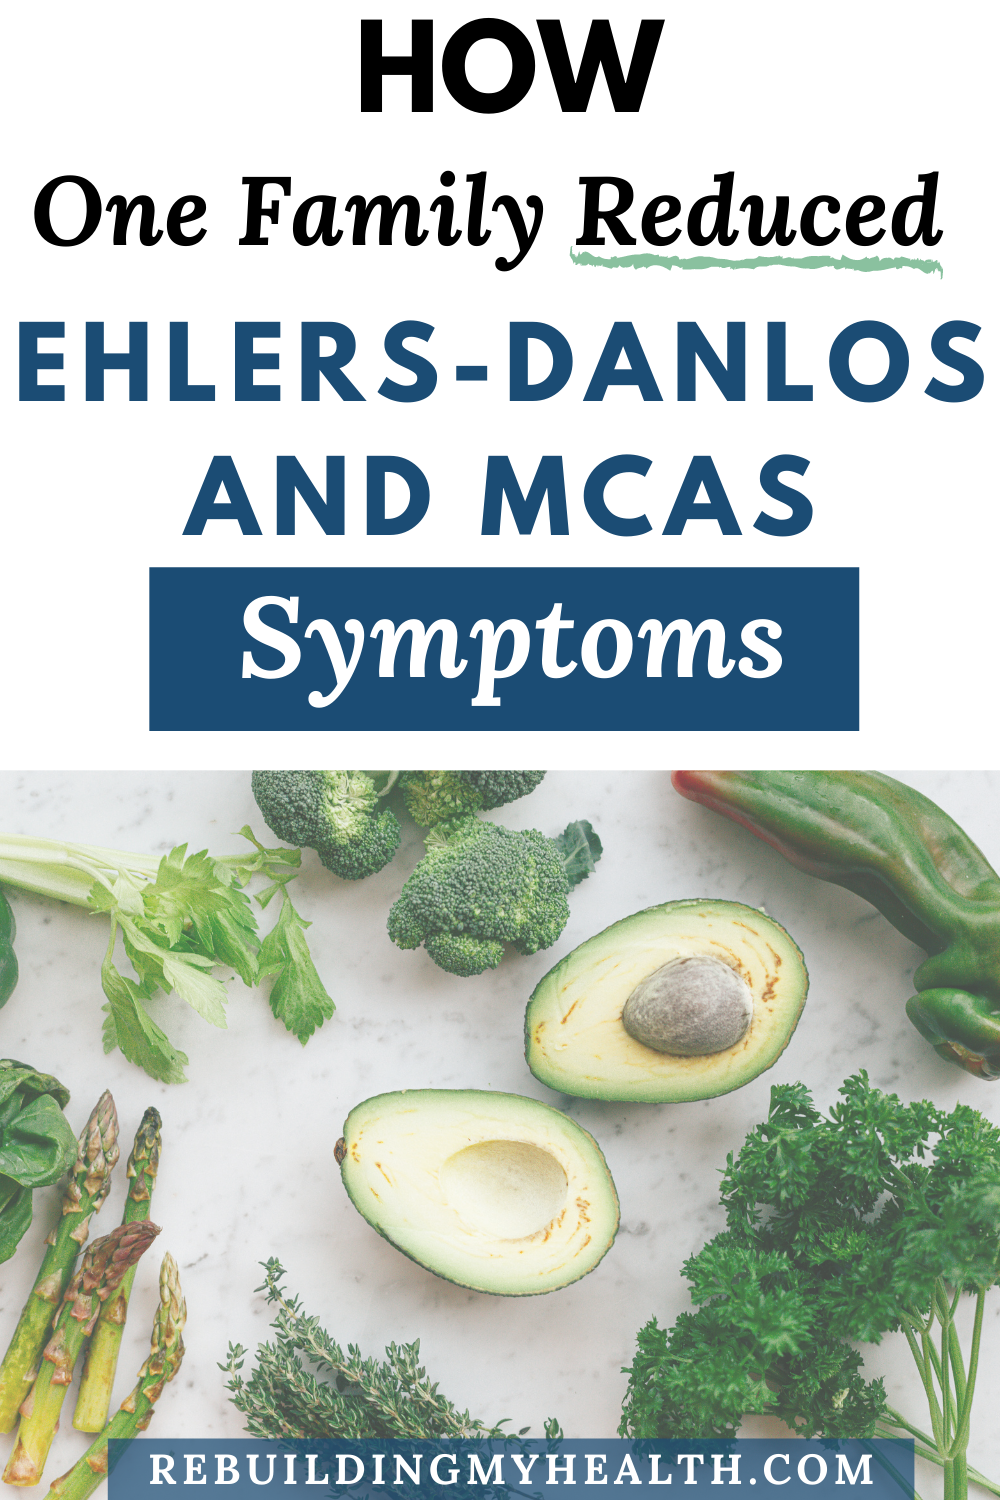 With diagnoses of Ehlers-Danlos Syndrome, mast-cell activation syndrome and POTS, the Lara family found relief with a cleaner diet, exercise and by eliminating chemicals.